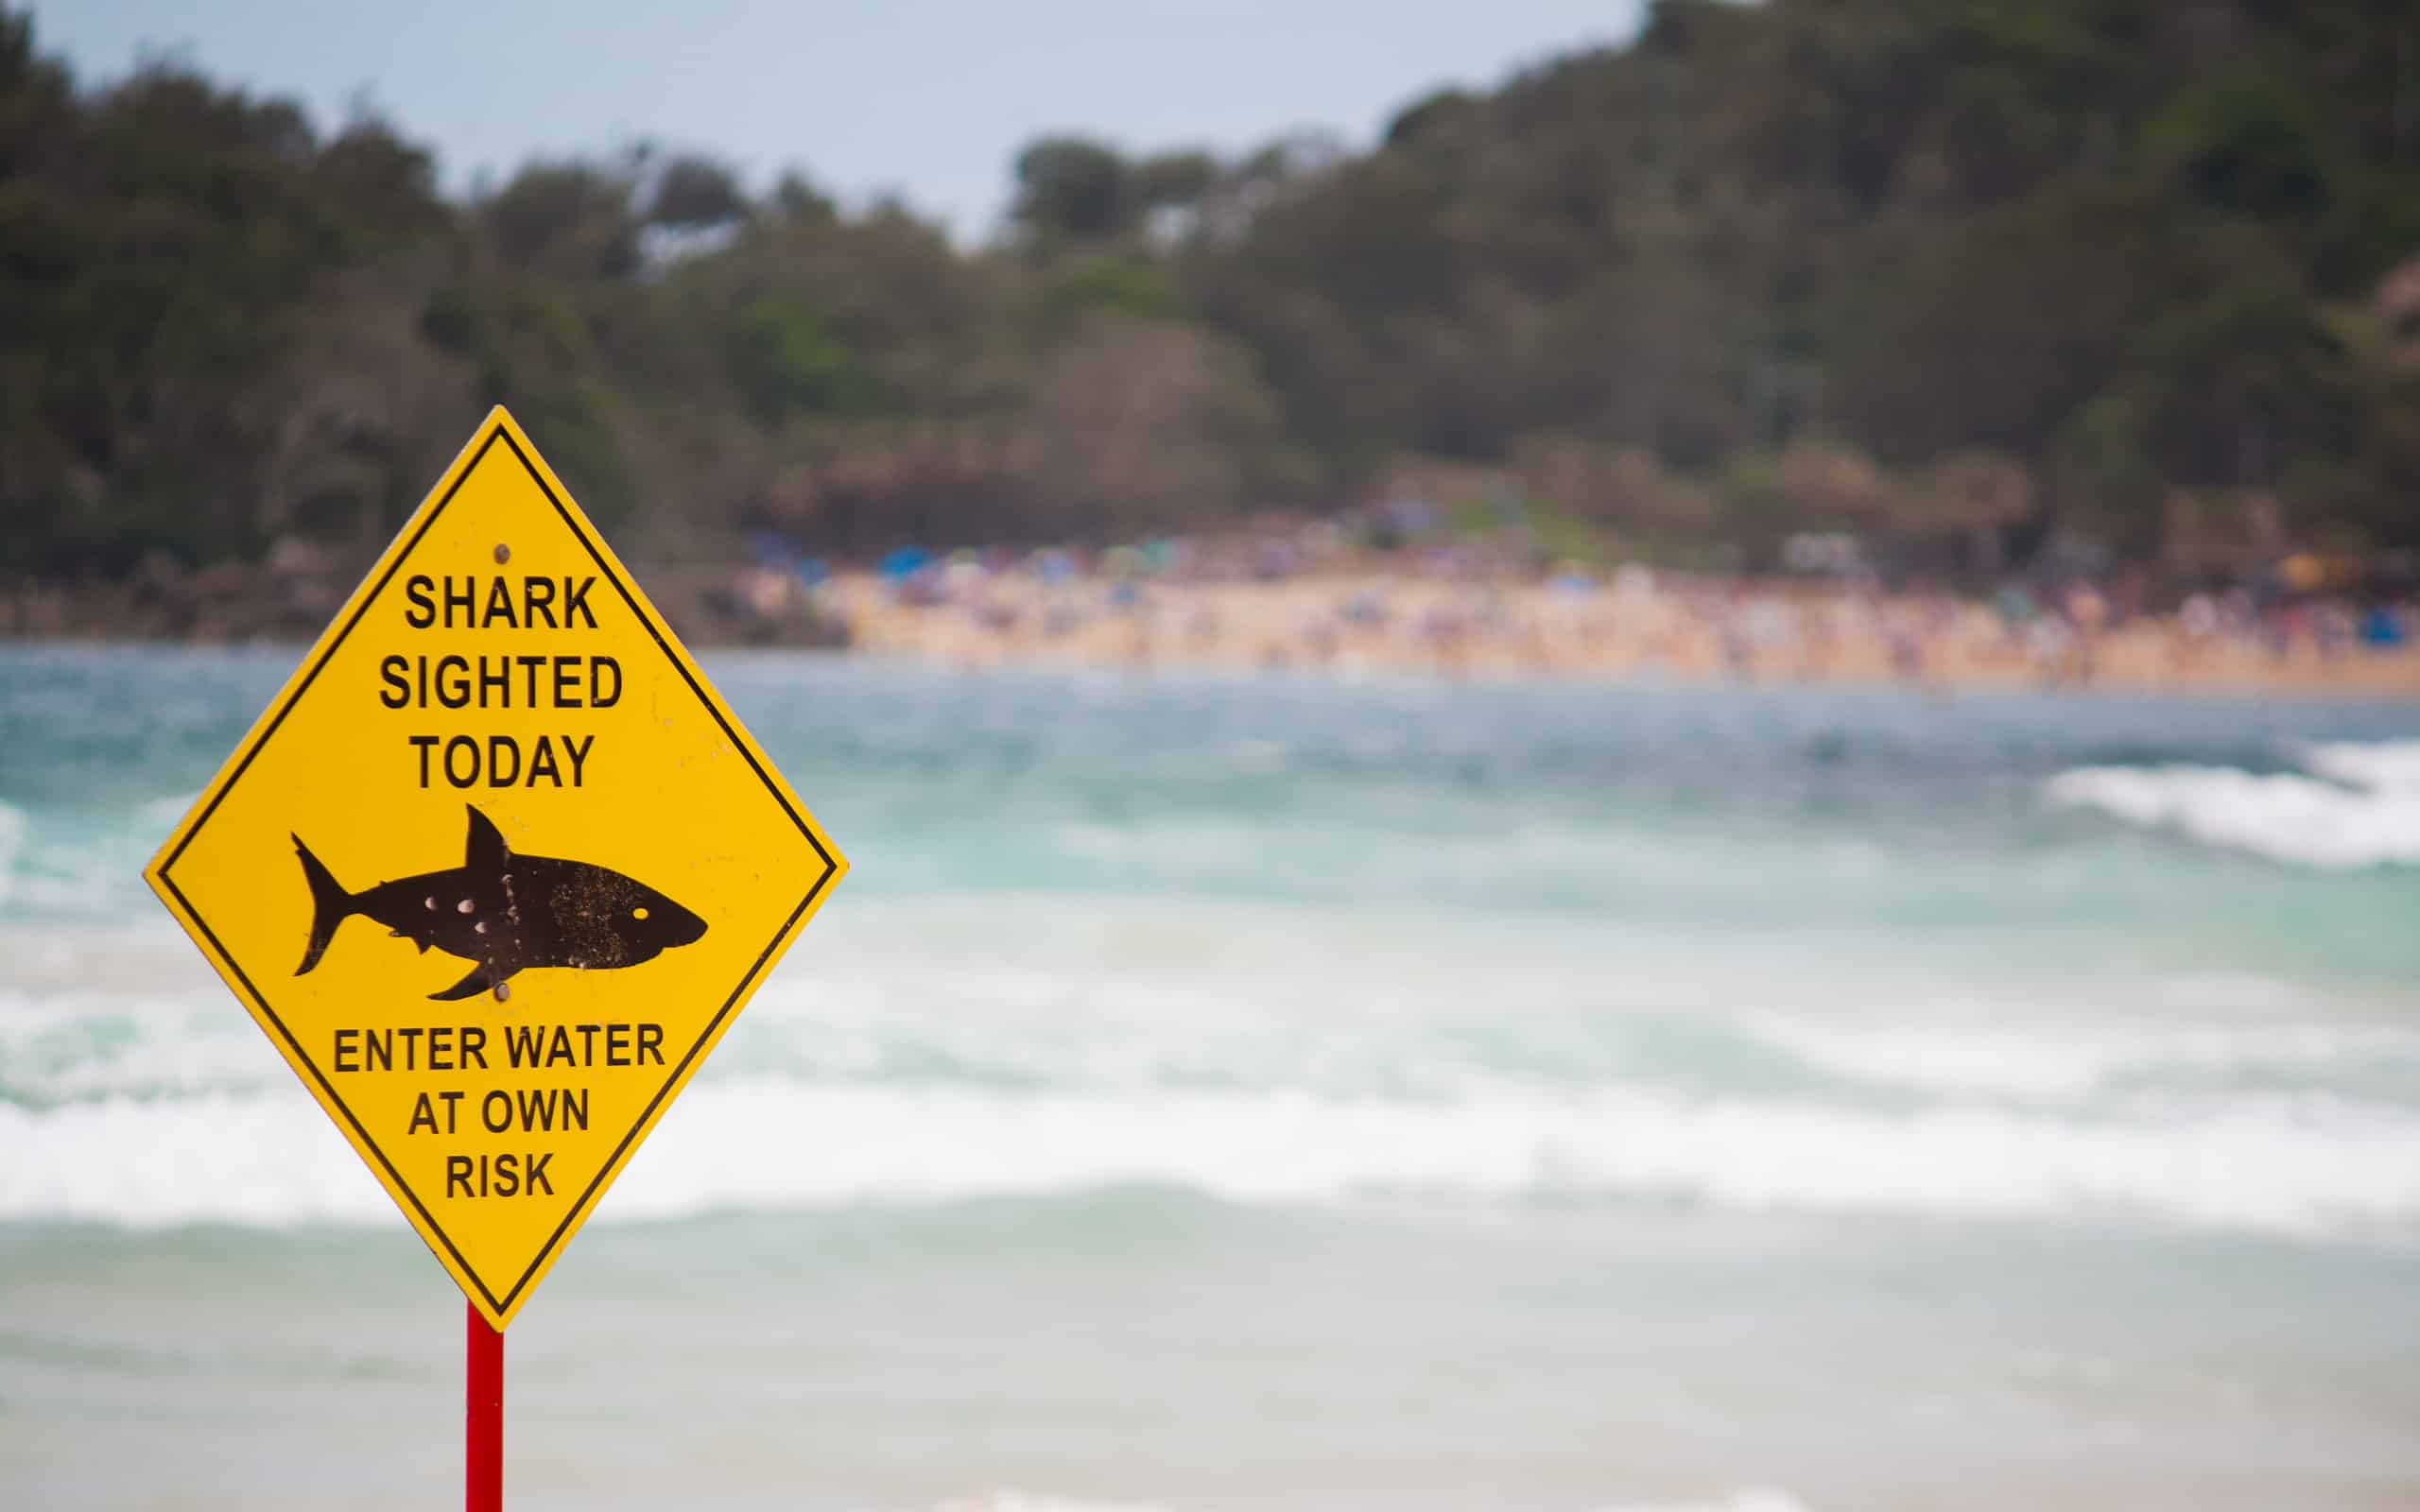 A yellow shark warning sign ahead of the waves at the beach